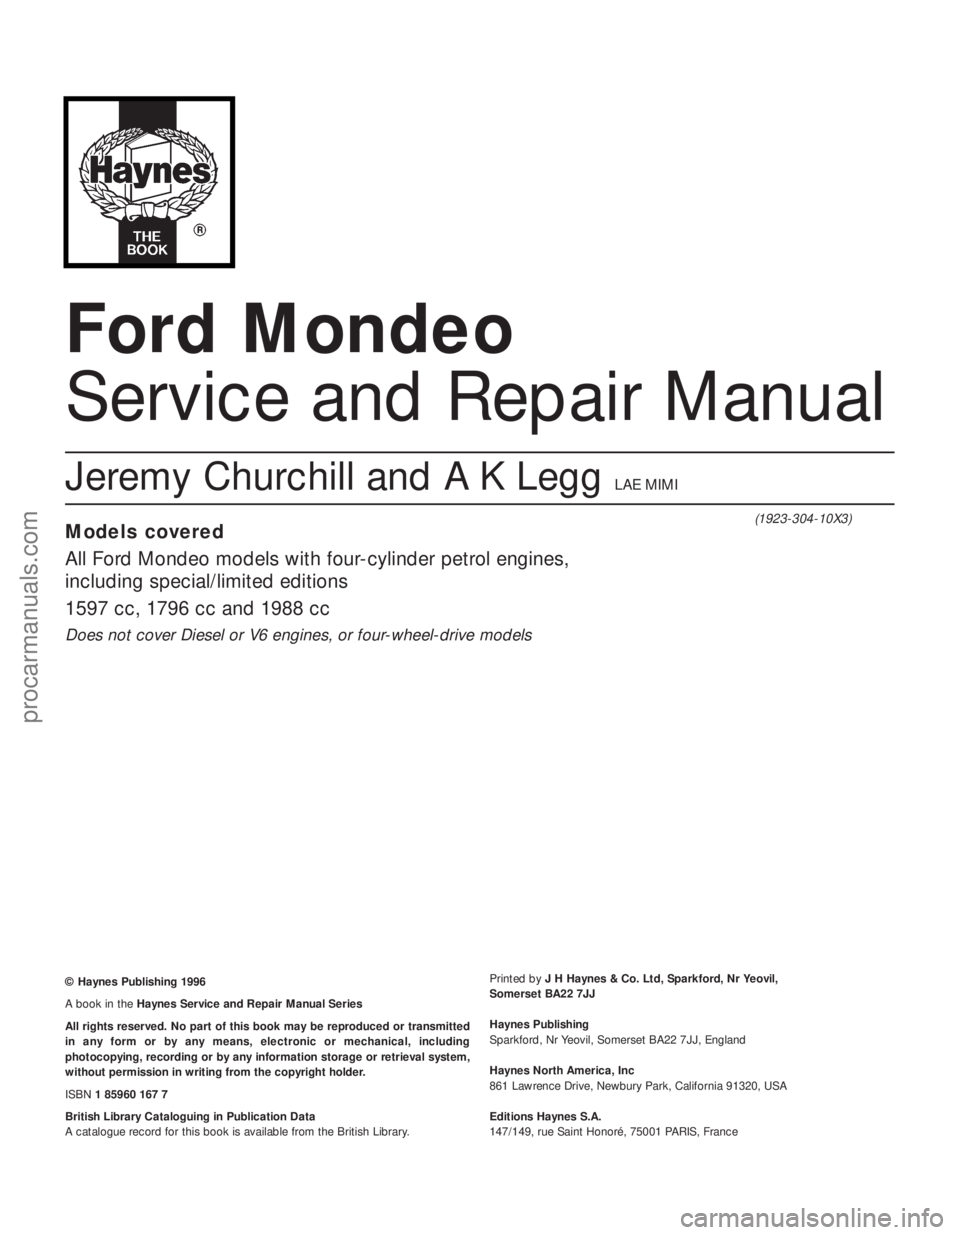 FORD MONDEO 1993  Service Repair Manual Ford Mondeo
Service and Repair Manual
Jeremy Churchill and A K Legg LAE MIMI 
Models covered
All Ford Mondeo models with four-cylinder petrol engines,
including special/limited editions
1597 cc, 1796 